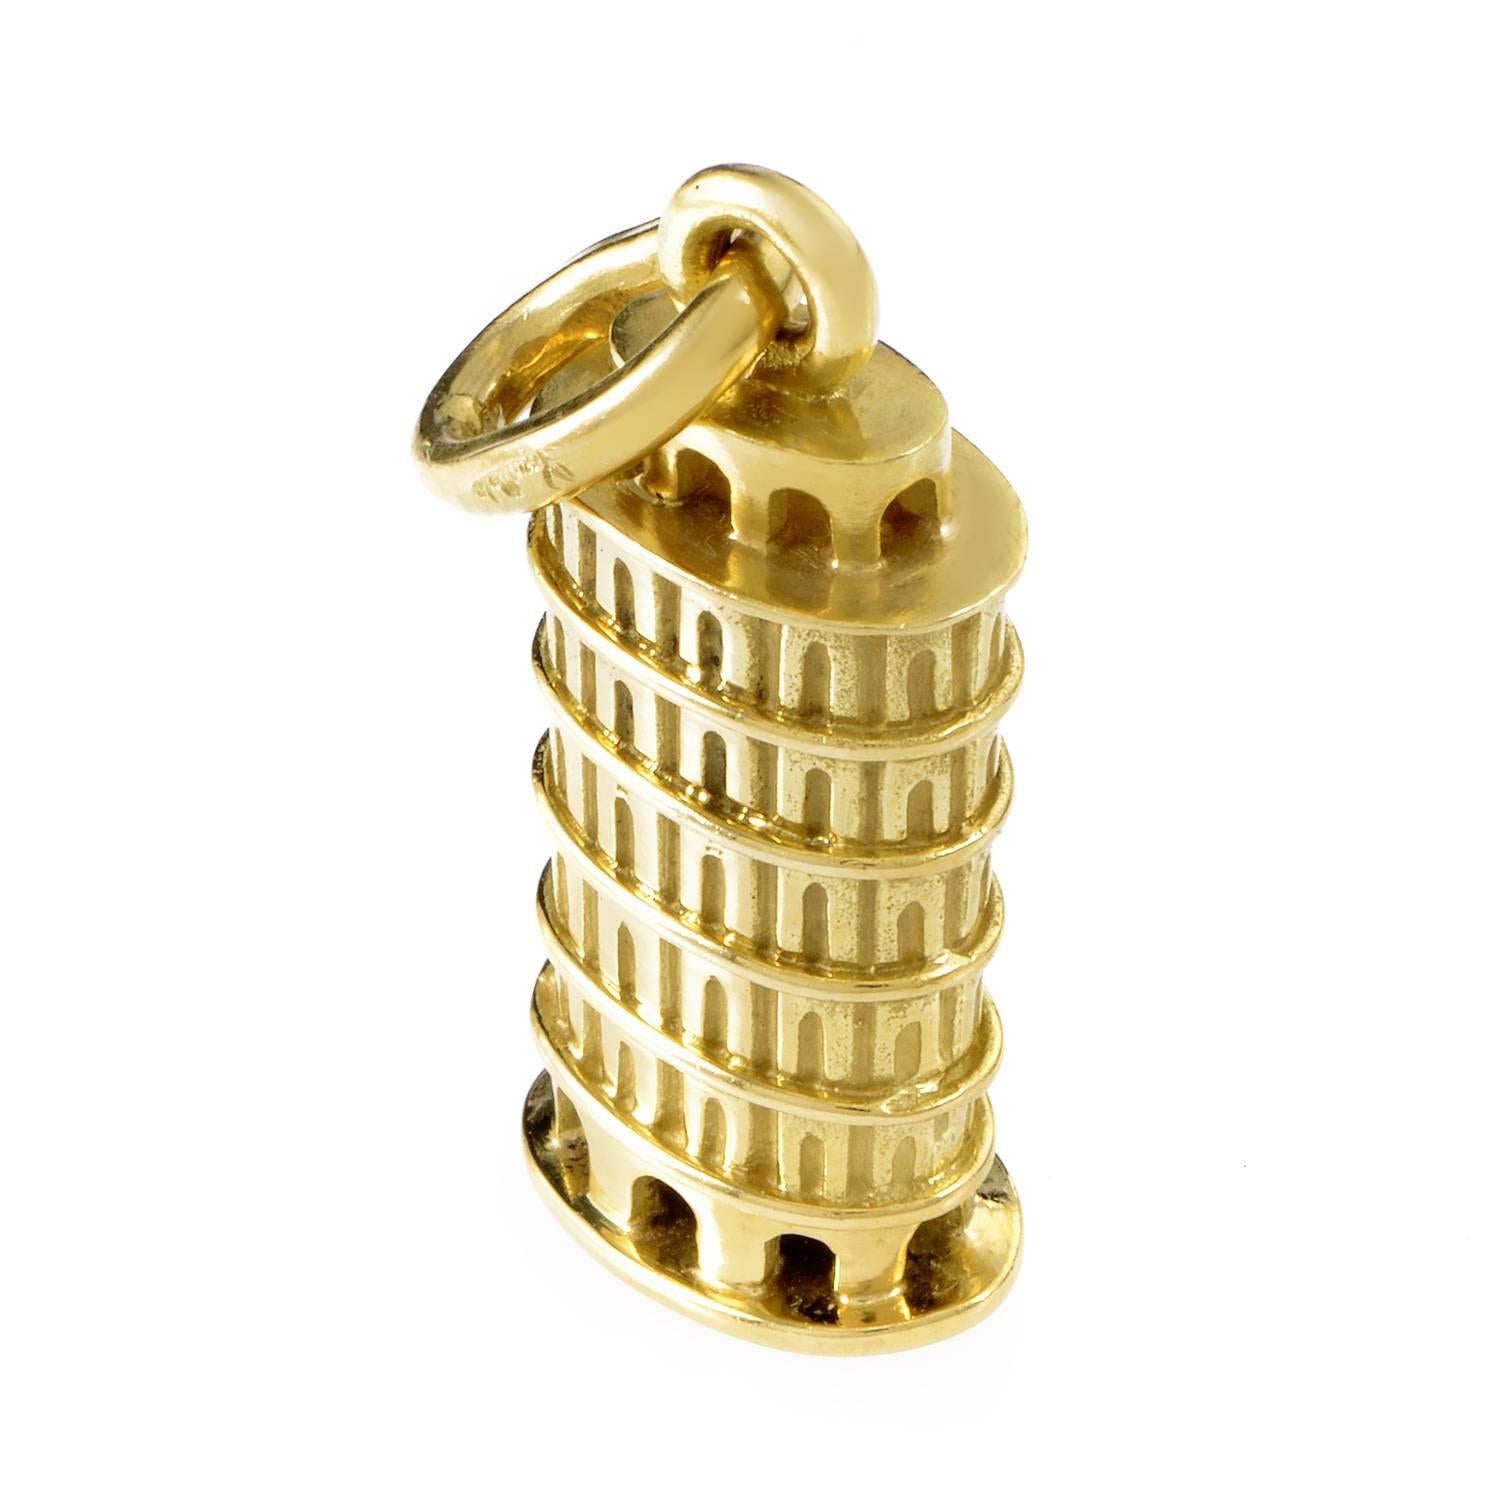 An adorable depiction of one of the most famous buildings in the world, this beautiful charm from Pomellato is made from luxuriously gleaming 18K yellow gold in the shape of the intriguing Leaning Tower of Pisa.